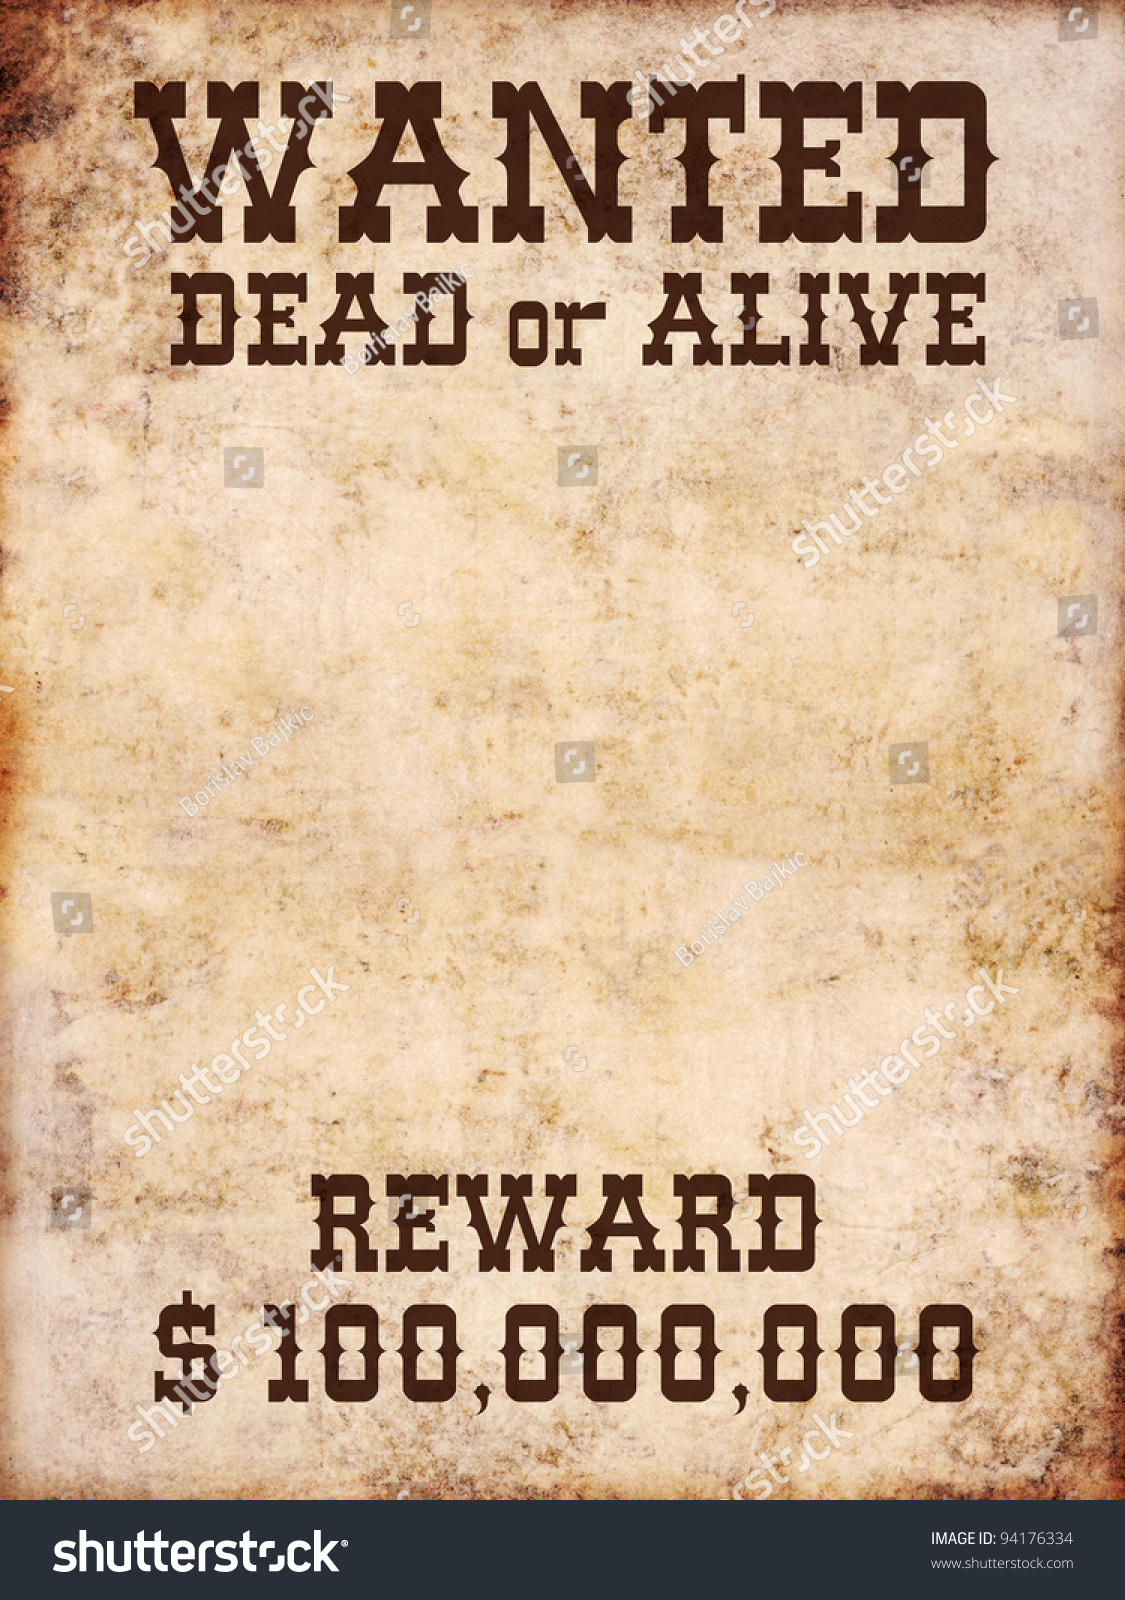 Wanted Poster Dead Or Alive Stock Photo 94176334 : Shutterstock